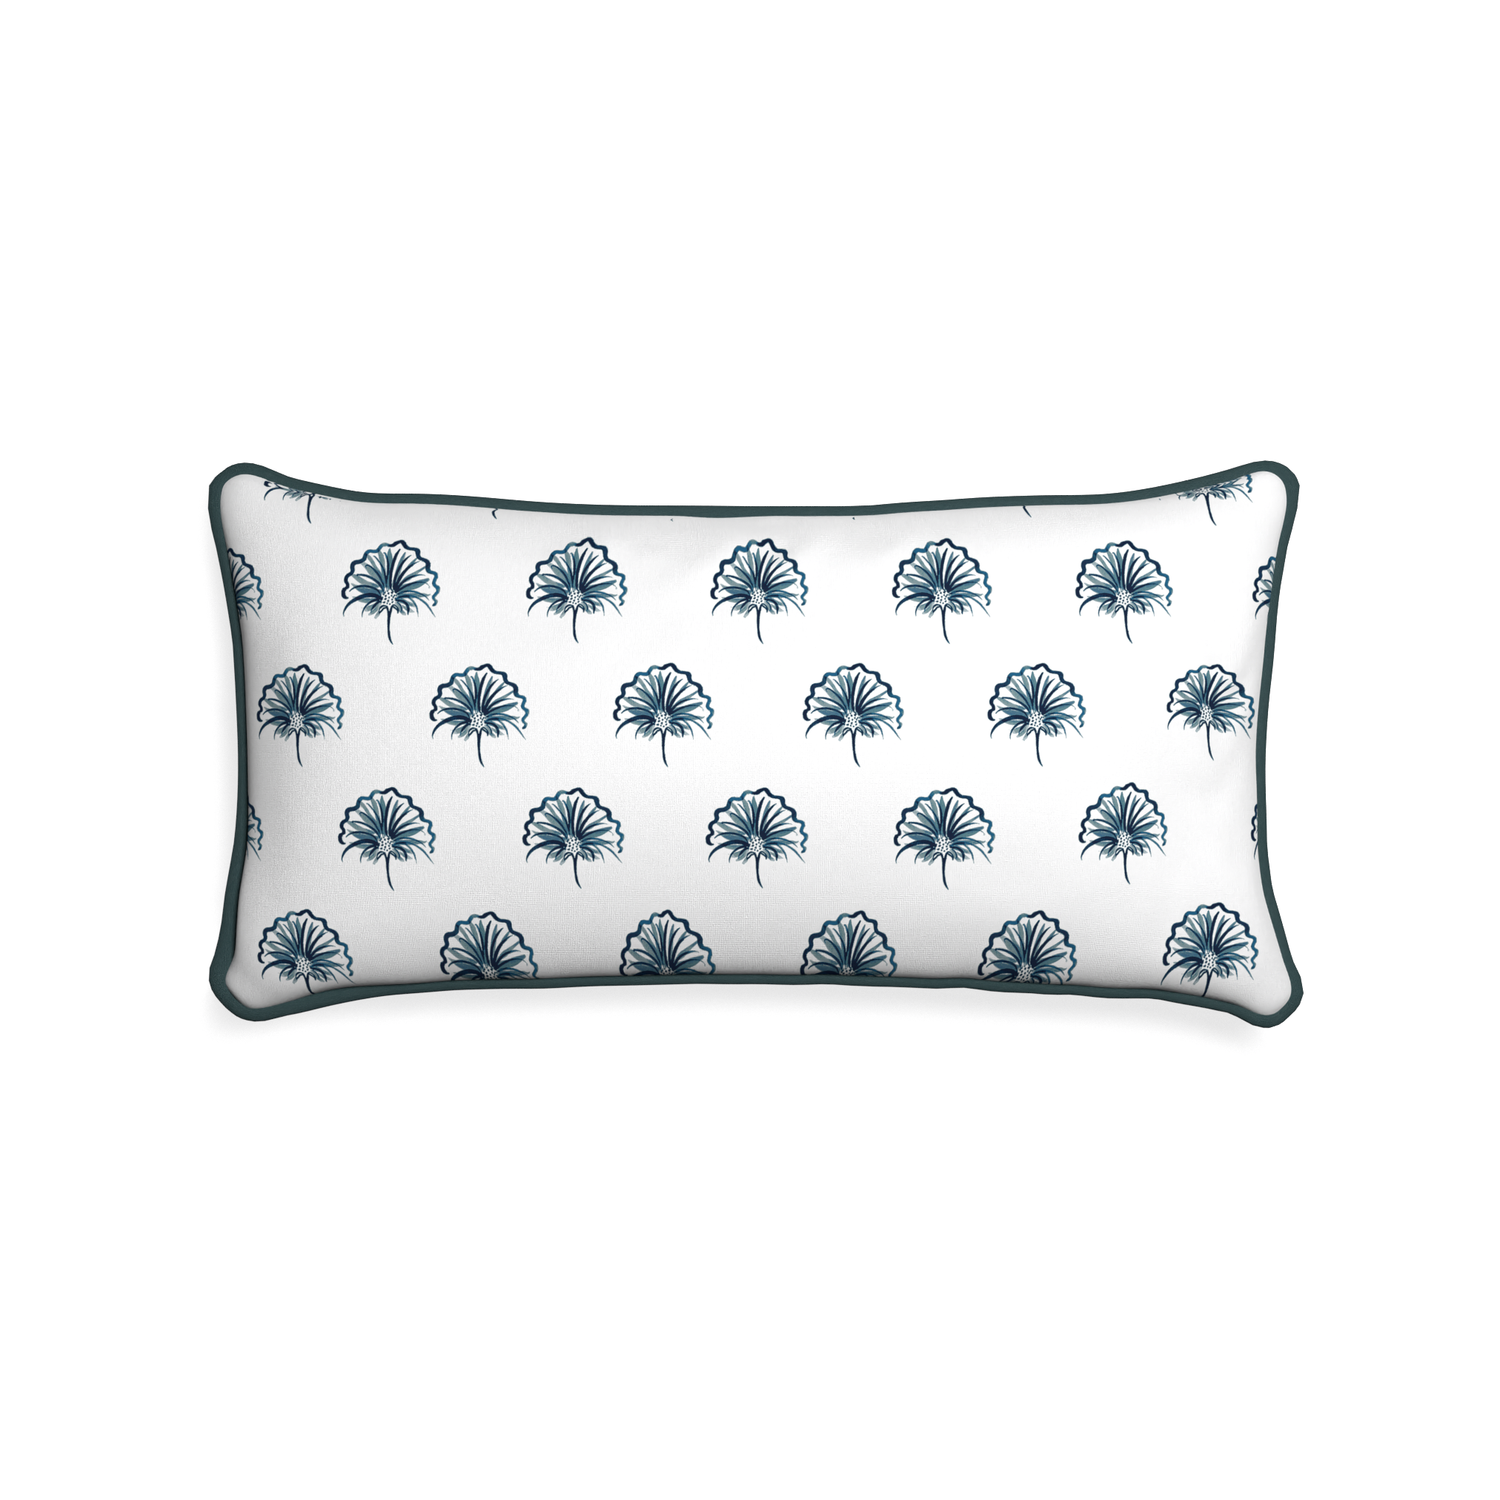 Midi-lumbar penelope midnight custom floral navypillow with p piping on white background